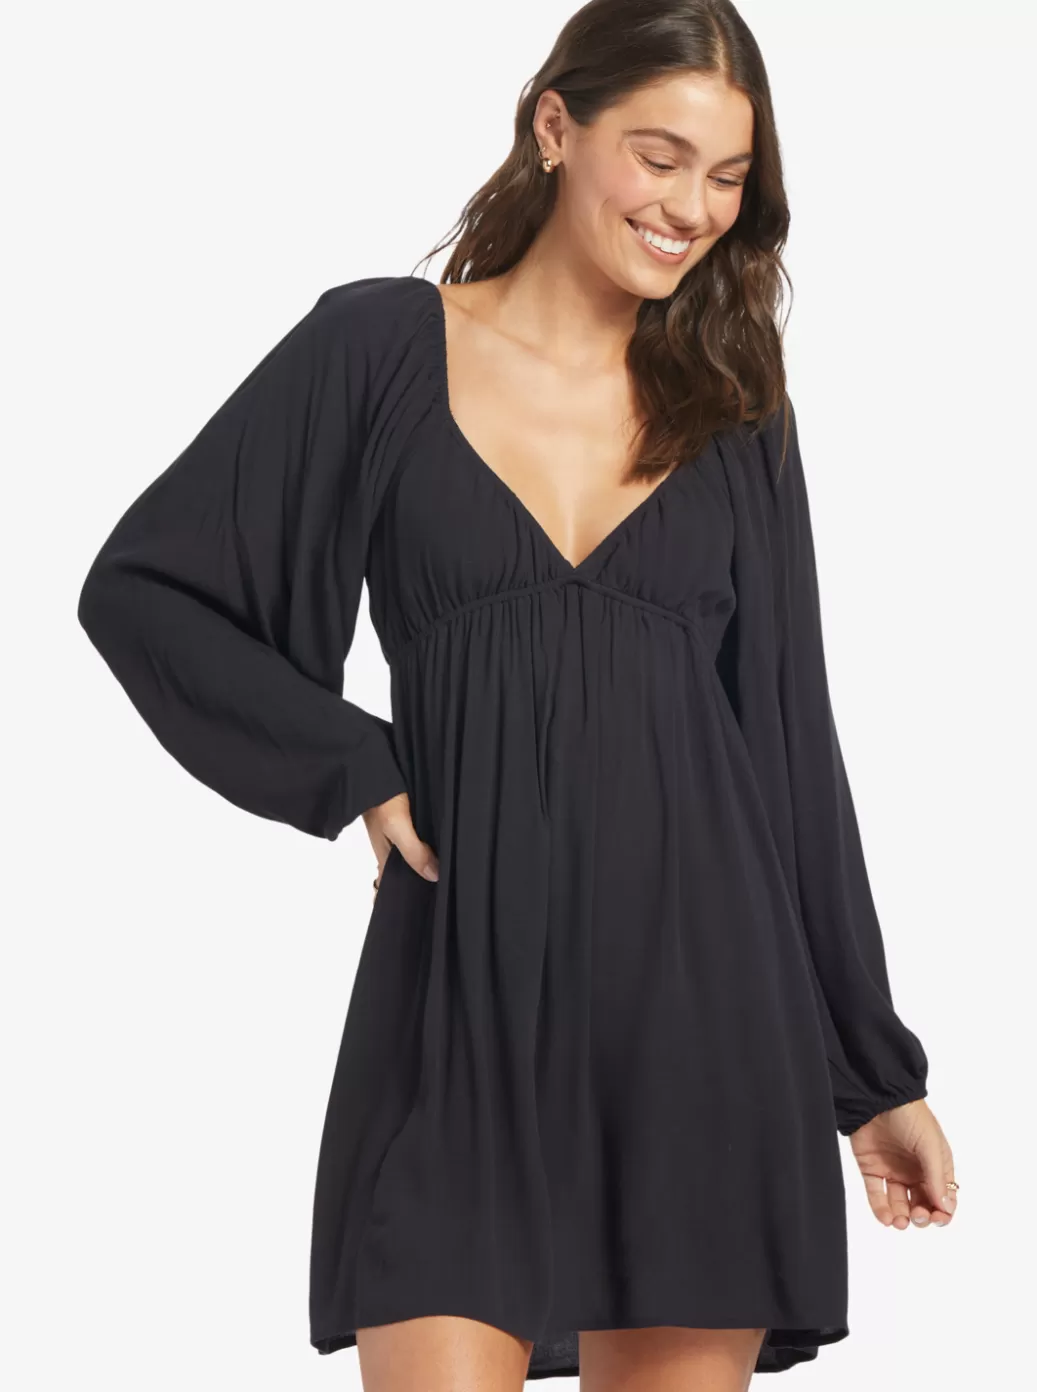 Dresses | WOMEN ROXY Sweetest Shores Dress Solid Dress Anthracite